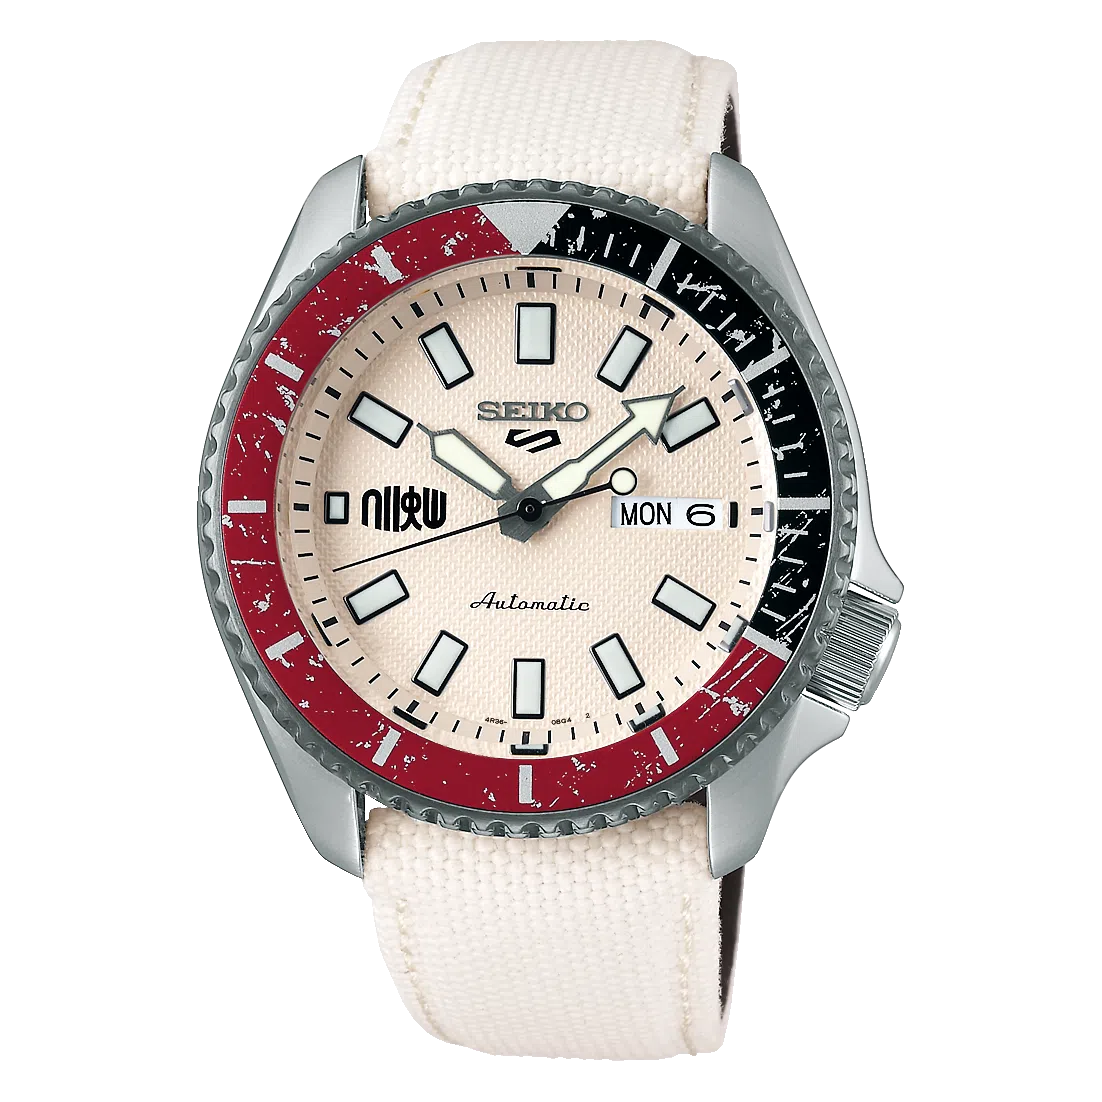 Seiko 5 SRPF19K1 Street Fighter "Ryu" Automatic Watch for Men's-Watch Portal Philippines